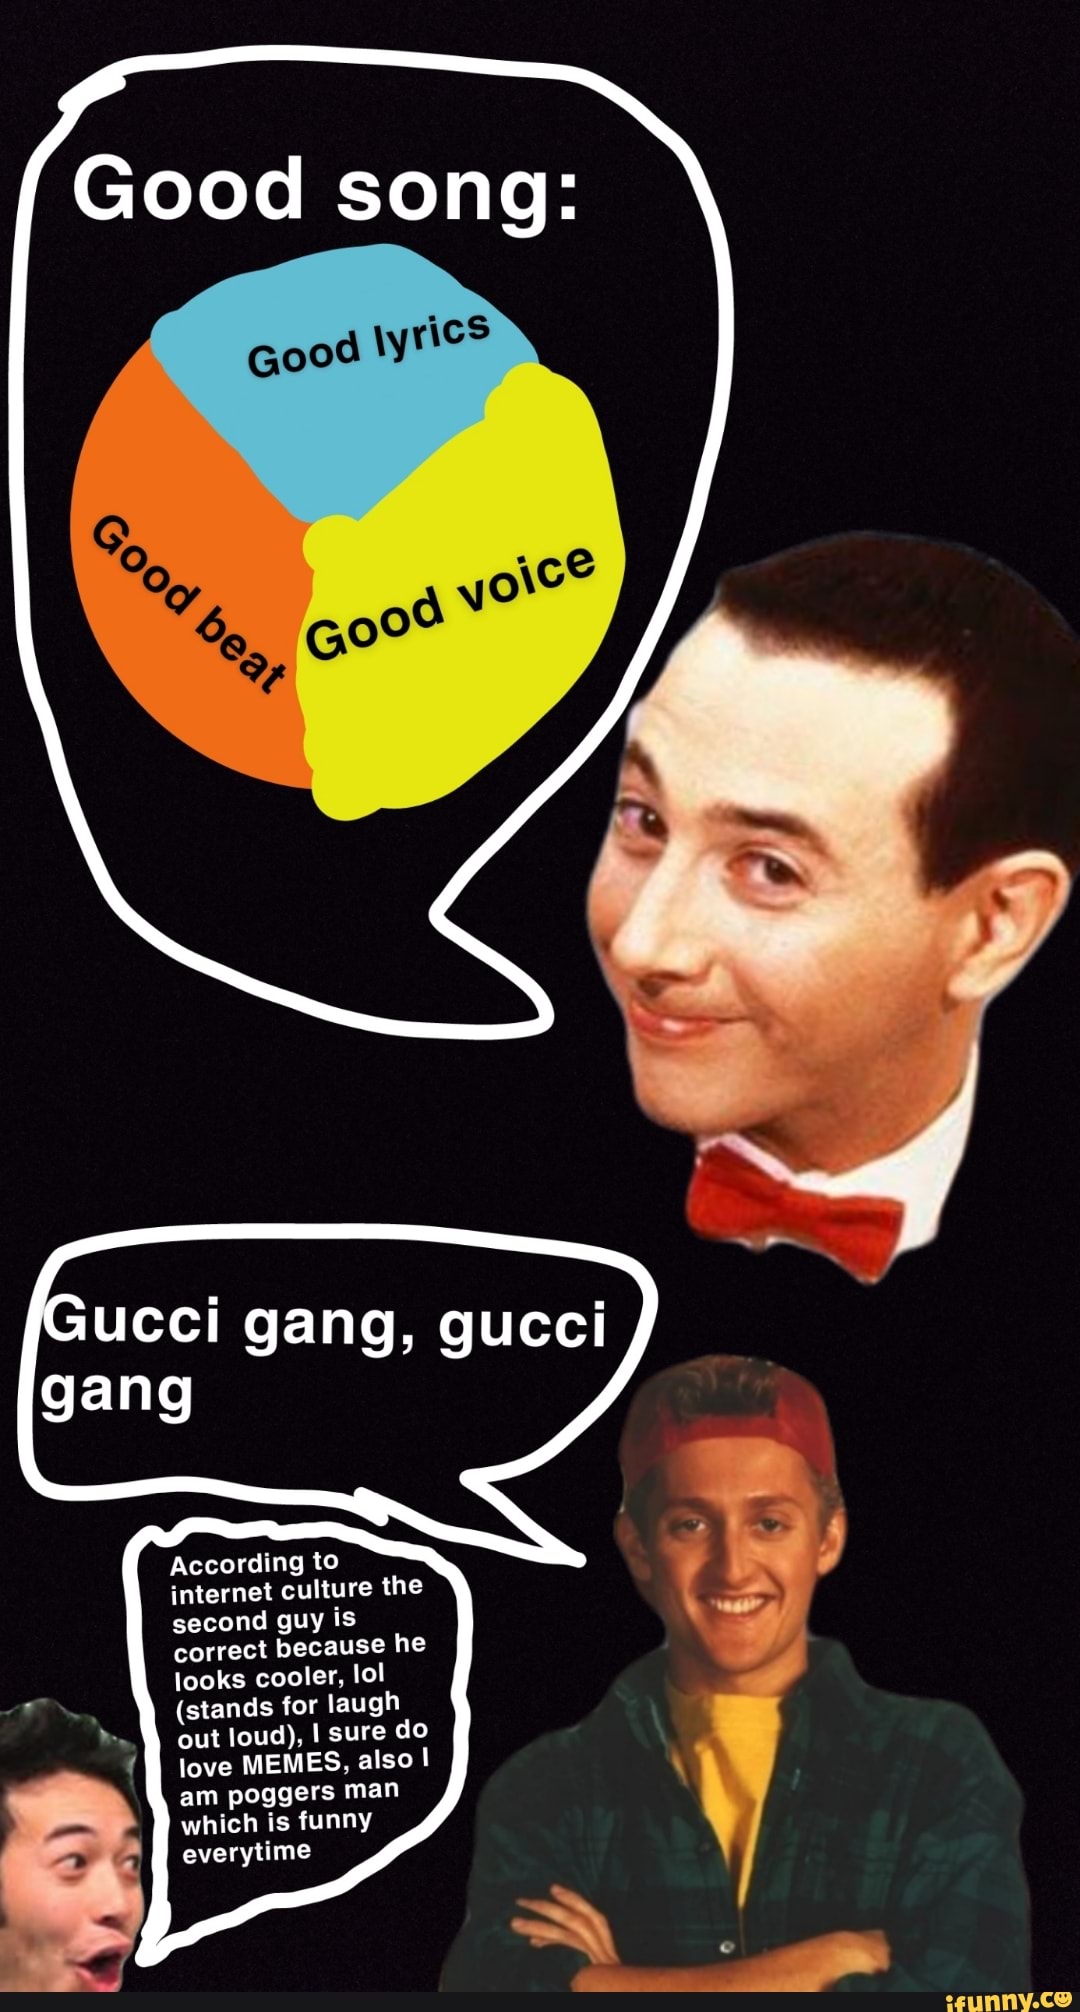 Good song: ucci gang, gucci gang According to culture the second guy is correct because